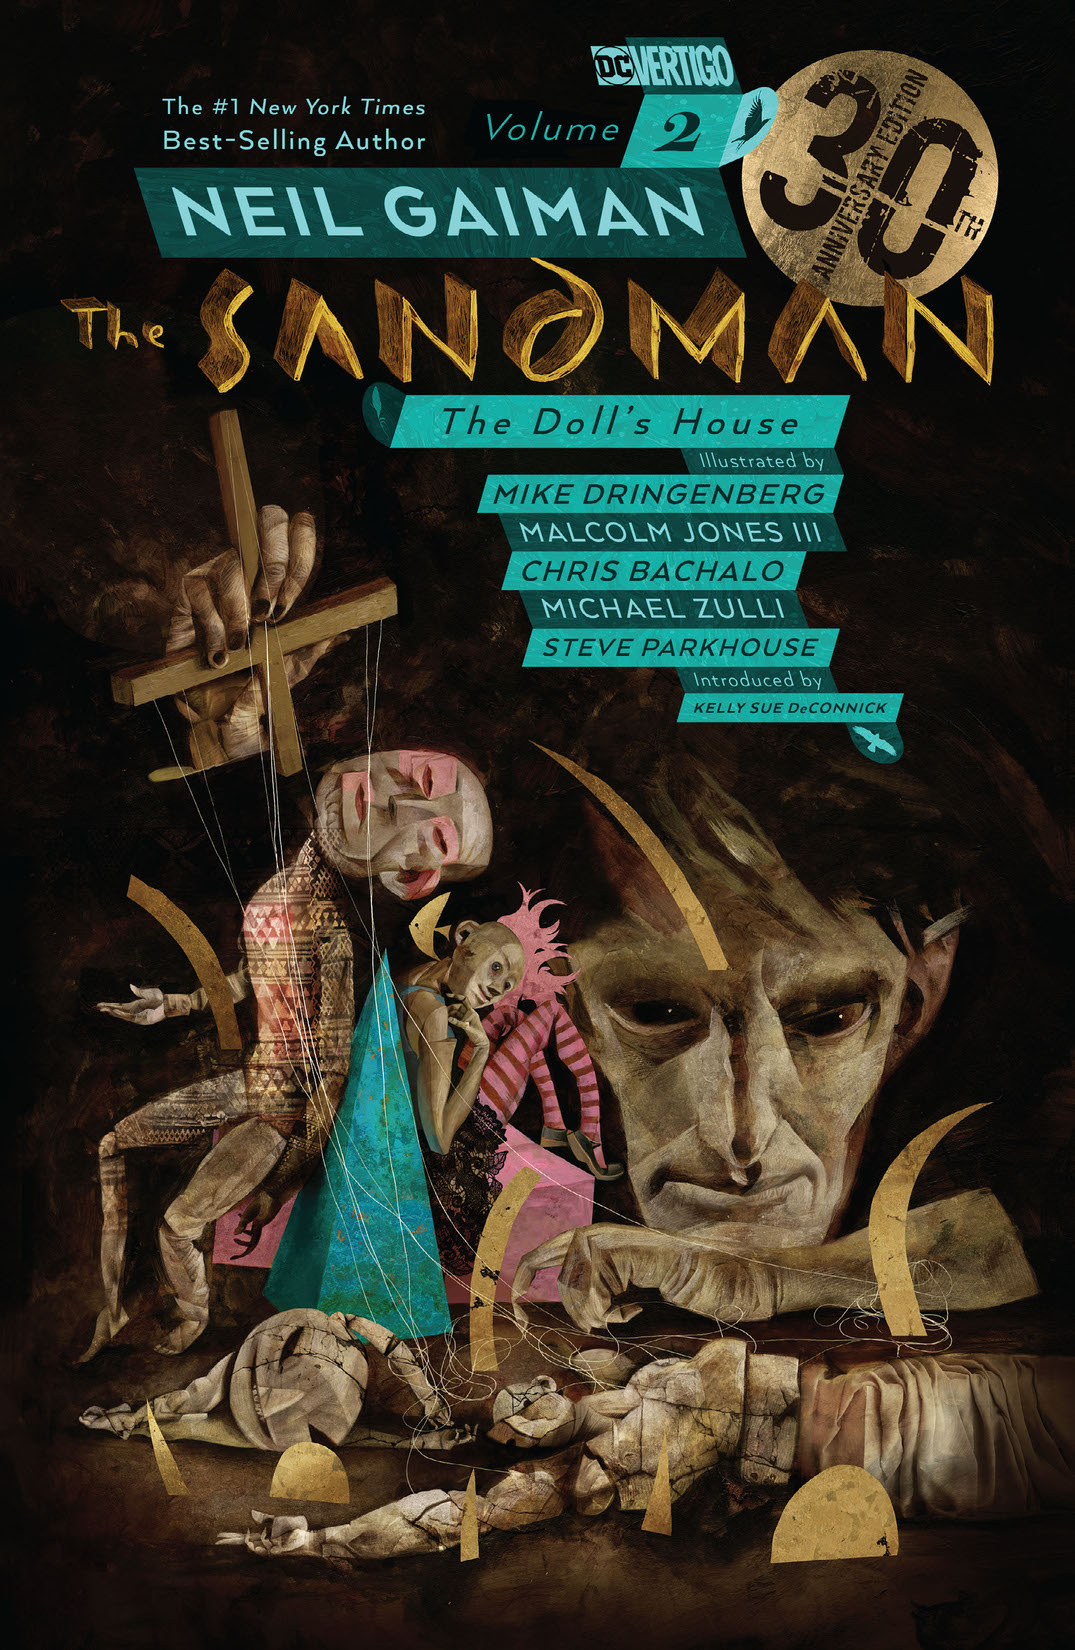 Sandman Vol. 2: The Doll's House 30th Anniversary Edition preview images